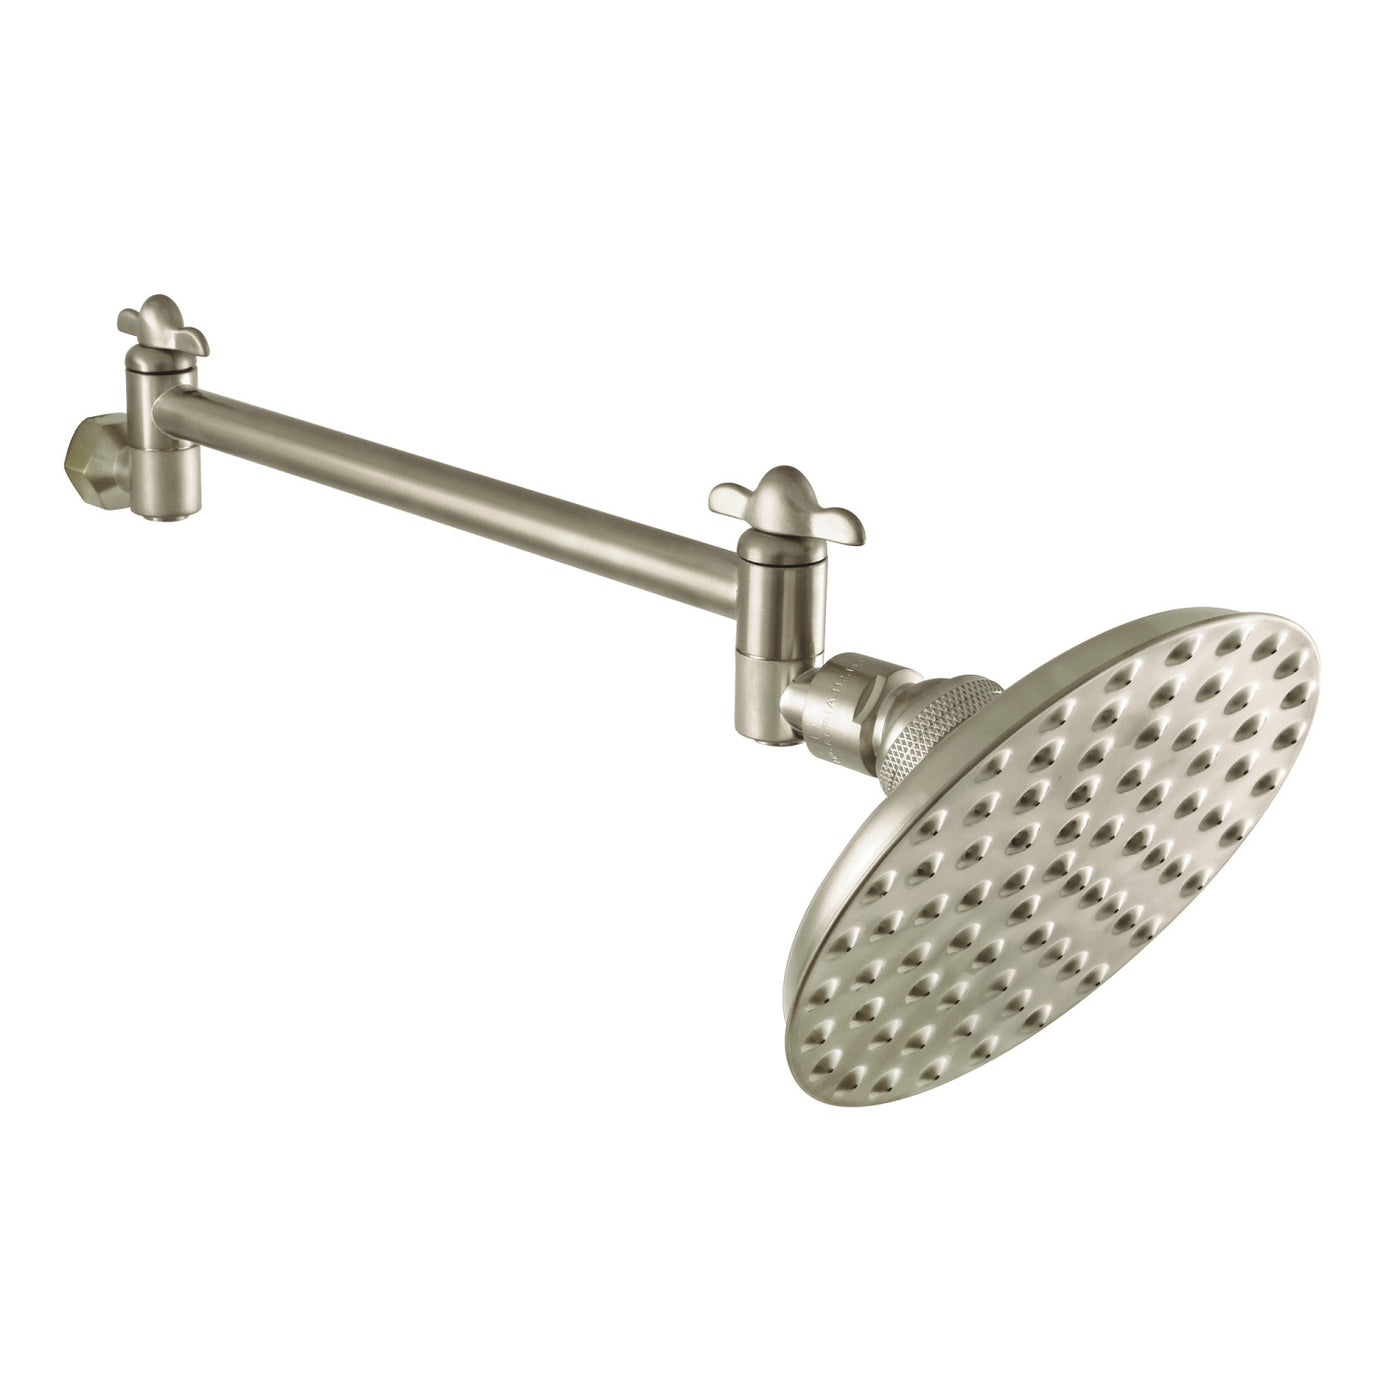 Elements of Design DCK13528 5" Showerhead with High Low Adjustable Arm, Brushed Nickel